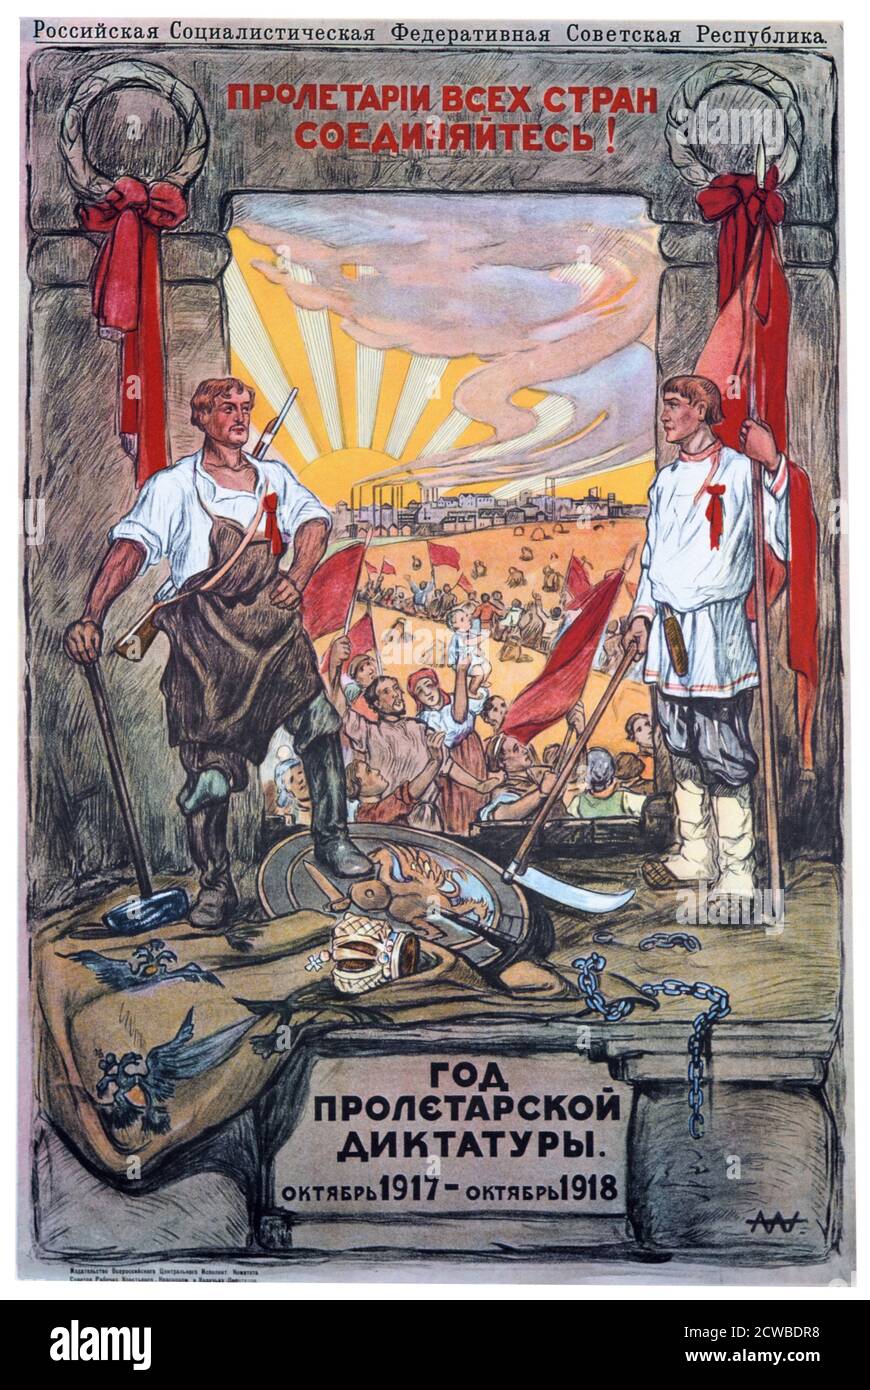 Dictatorship of the Proletariat Year: October 1917 - October 1918. Soviet Communist propaganda poster from the first year of the Russian Revolution. By Aleksander Apsit (1880 - 1943), a Latvian artist. After the October Revolution , Apsit was commissioned by the Soviet state publisher to design revolution posters because he had experience with political propaganda. Stock Photo